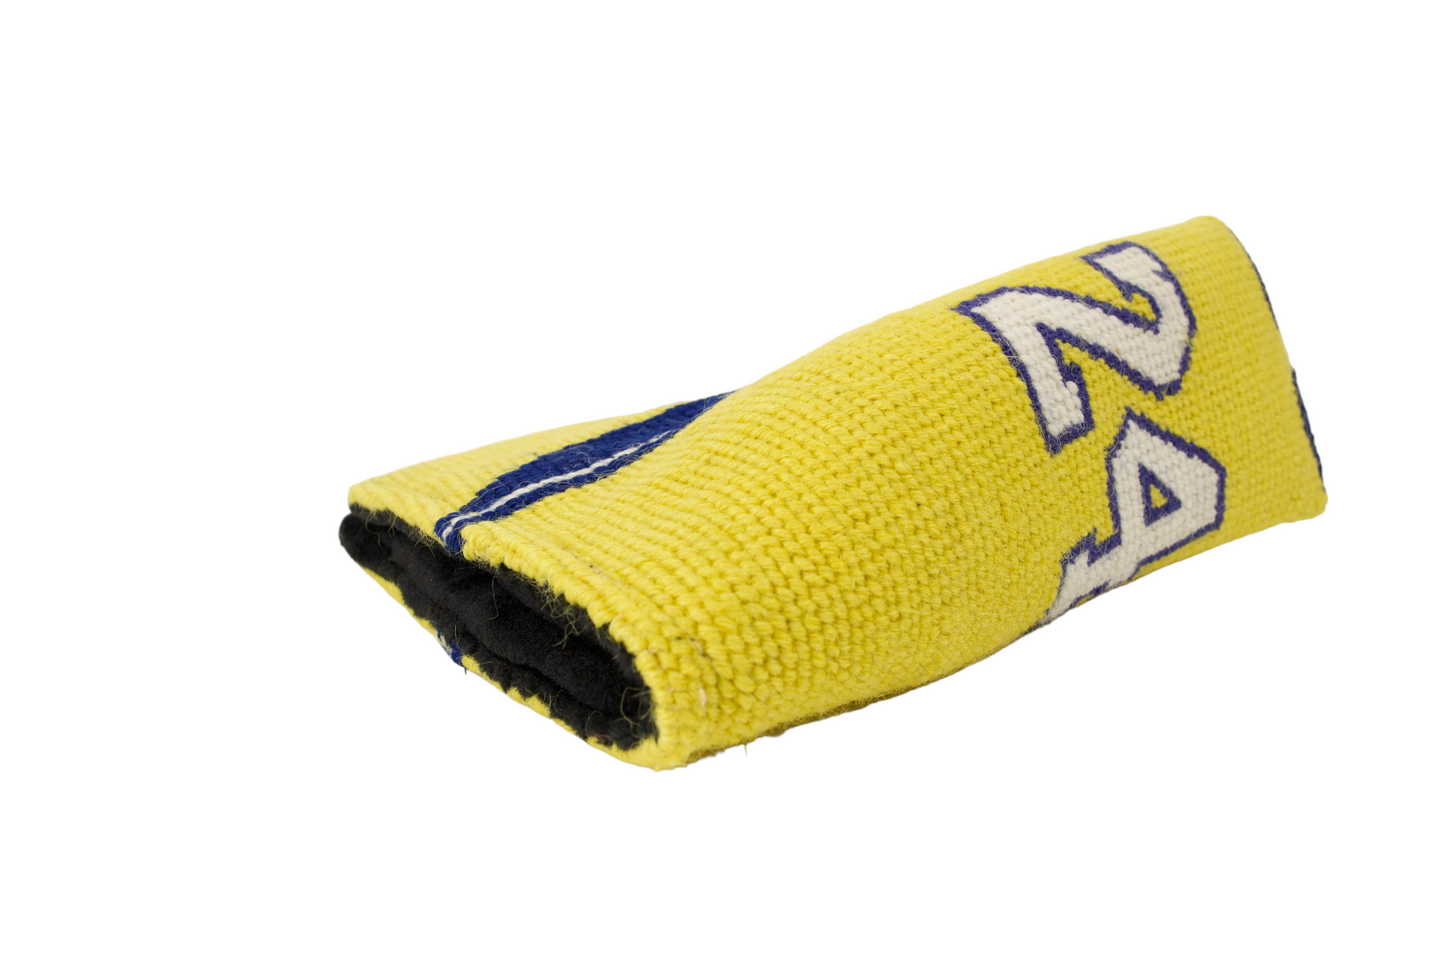 Mamba Mentality Blade Putter Headcover